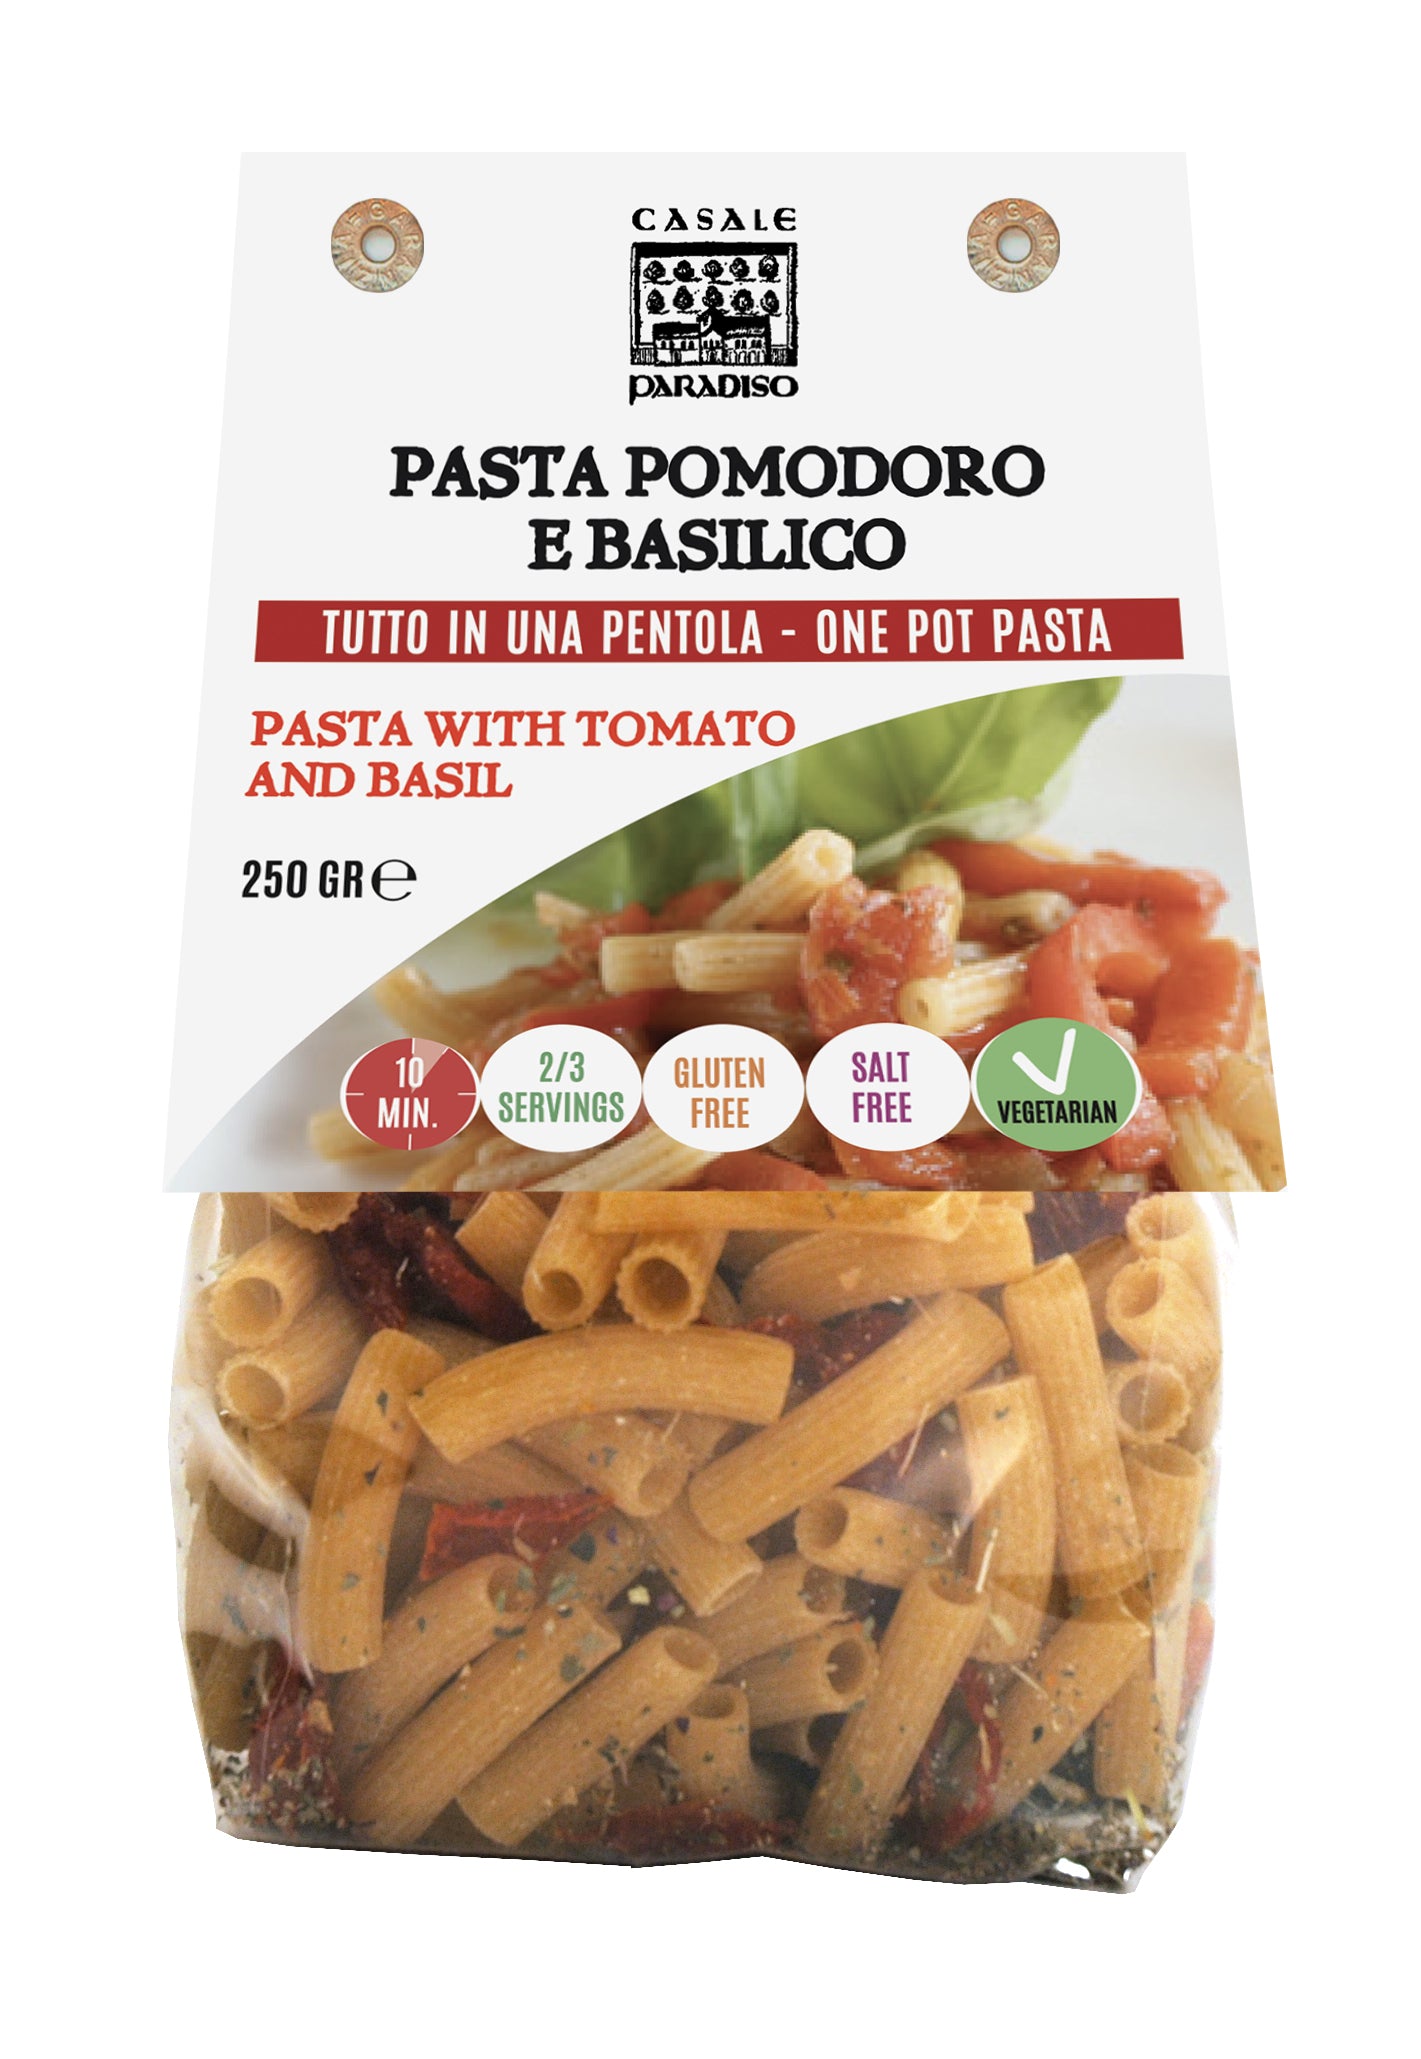 Ready-to-cook Pasta with Tomato and Basil, by Casale Paradiso 250 gr